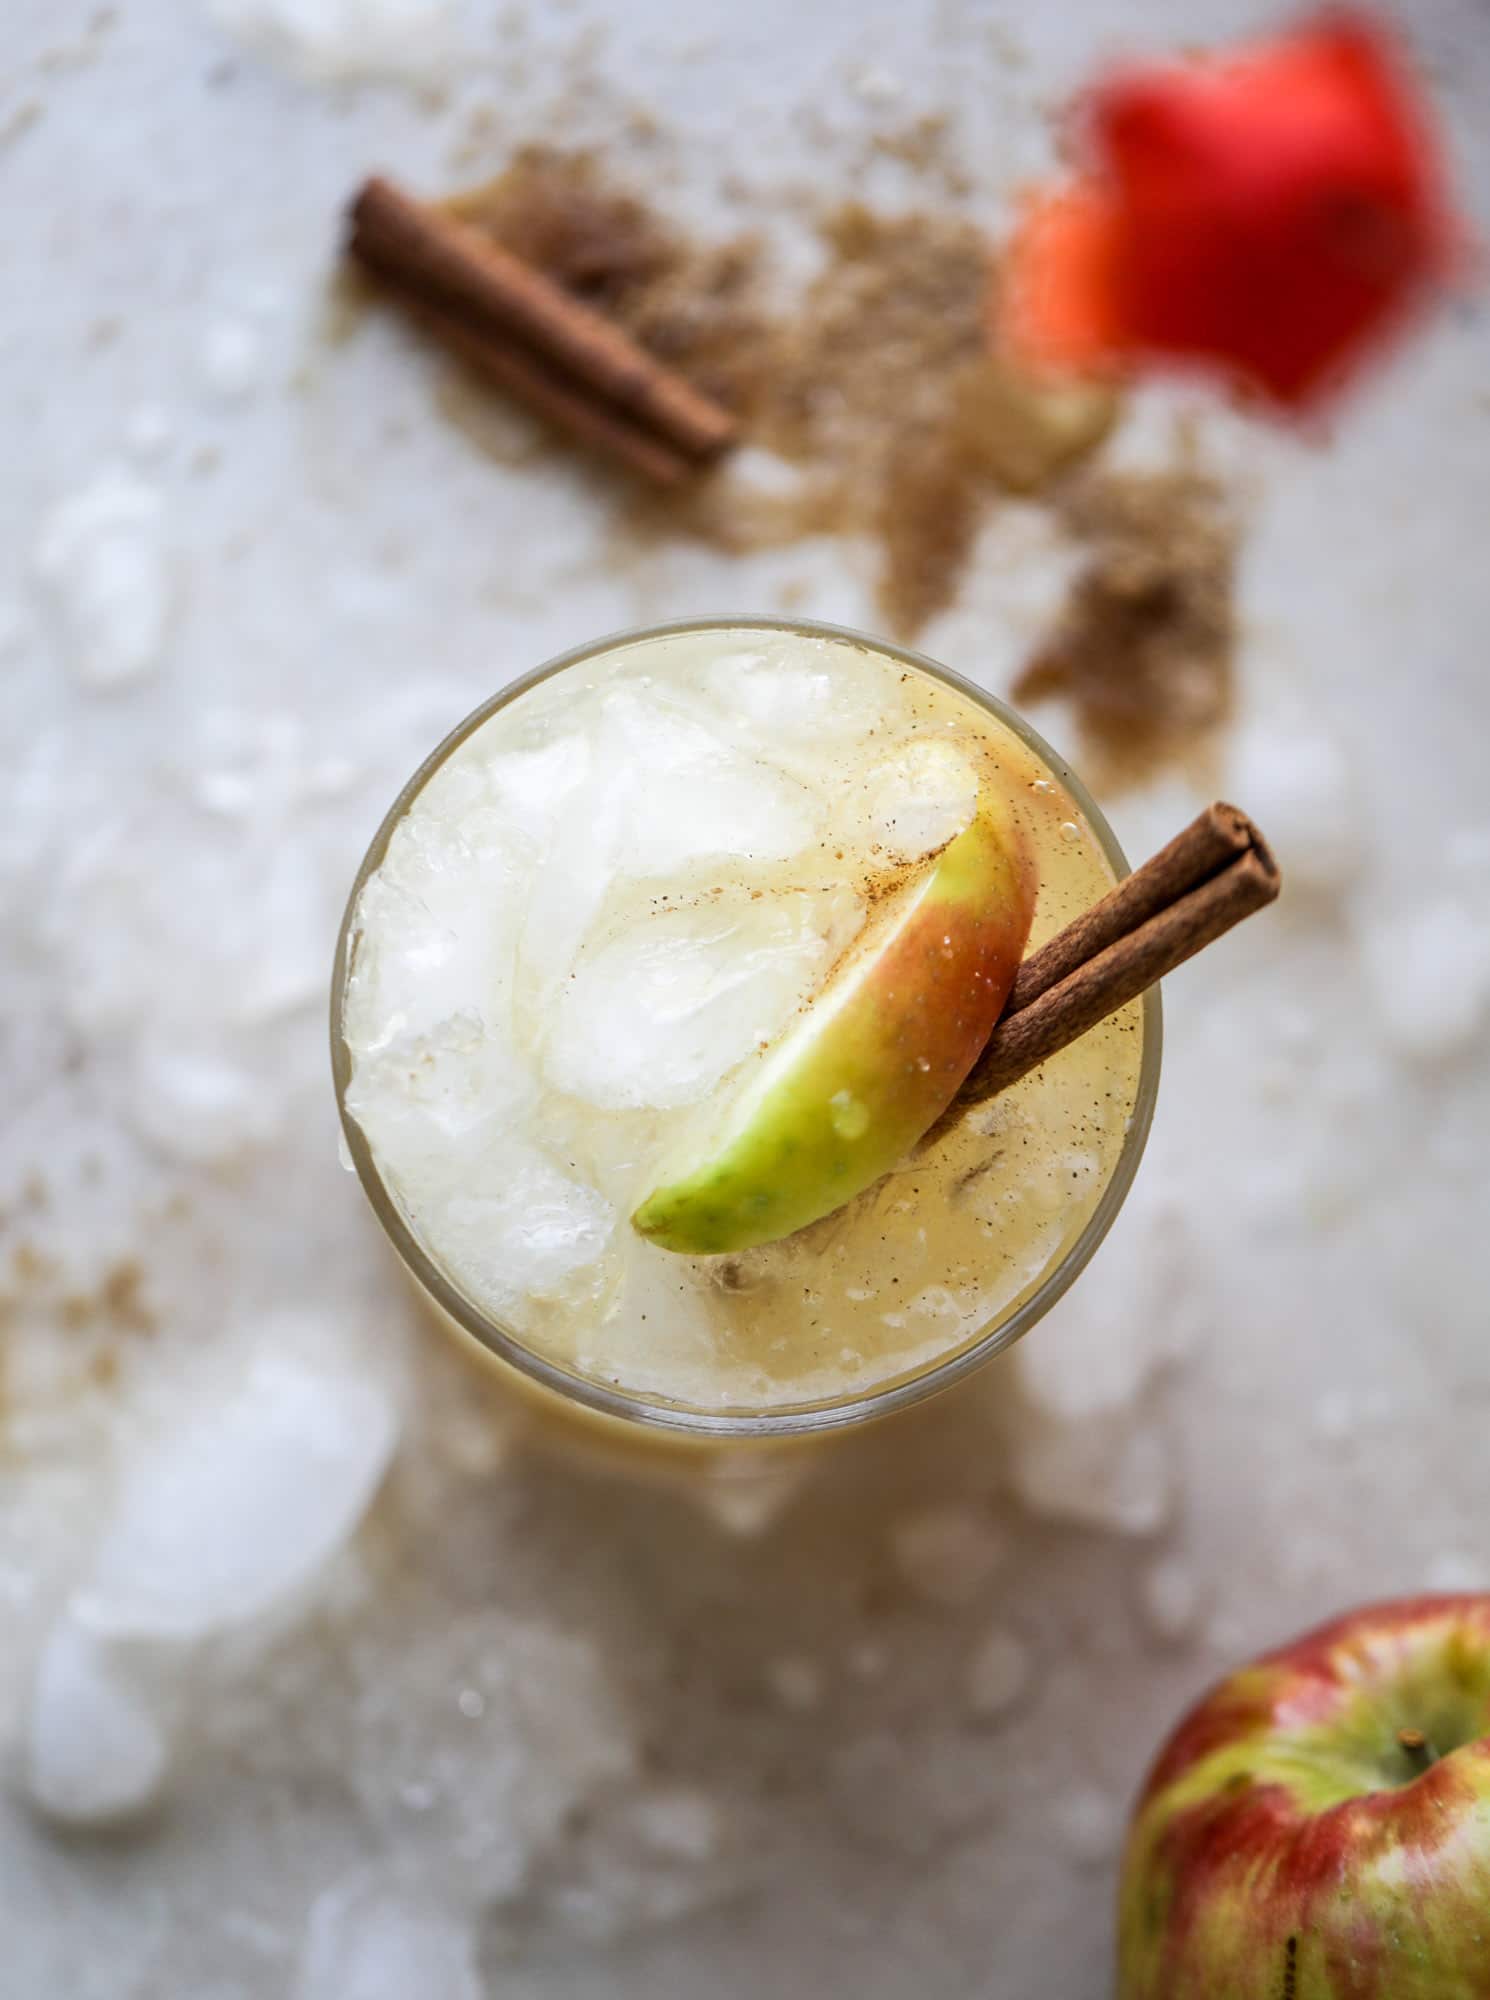 This honeycrisp apple cocktail is so perfect for fall! Fresh honeycrisp apple juice, honeycrisp apple syrup, vodka and ginger beer come together to create a refreshing, bubbly drink for autumn. Finished with a cinnamon sugar rim - YUM. I howsweeteats.com #honeycrisp #apple #cocktail #fall #drinks #vodka